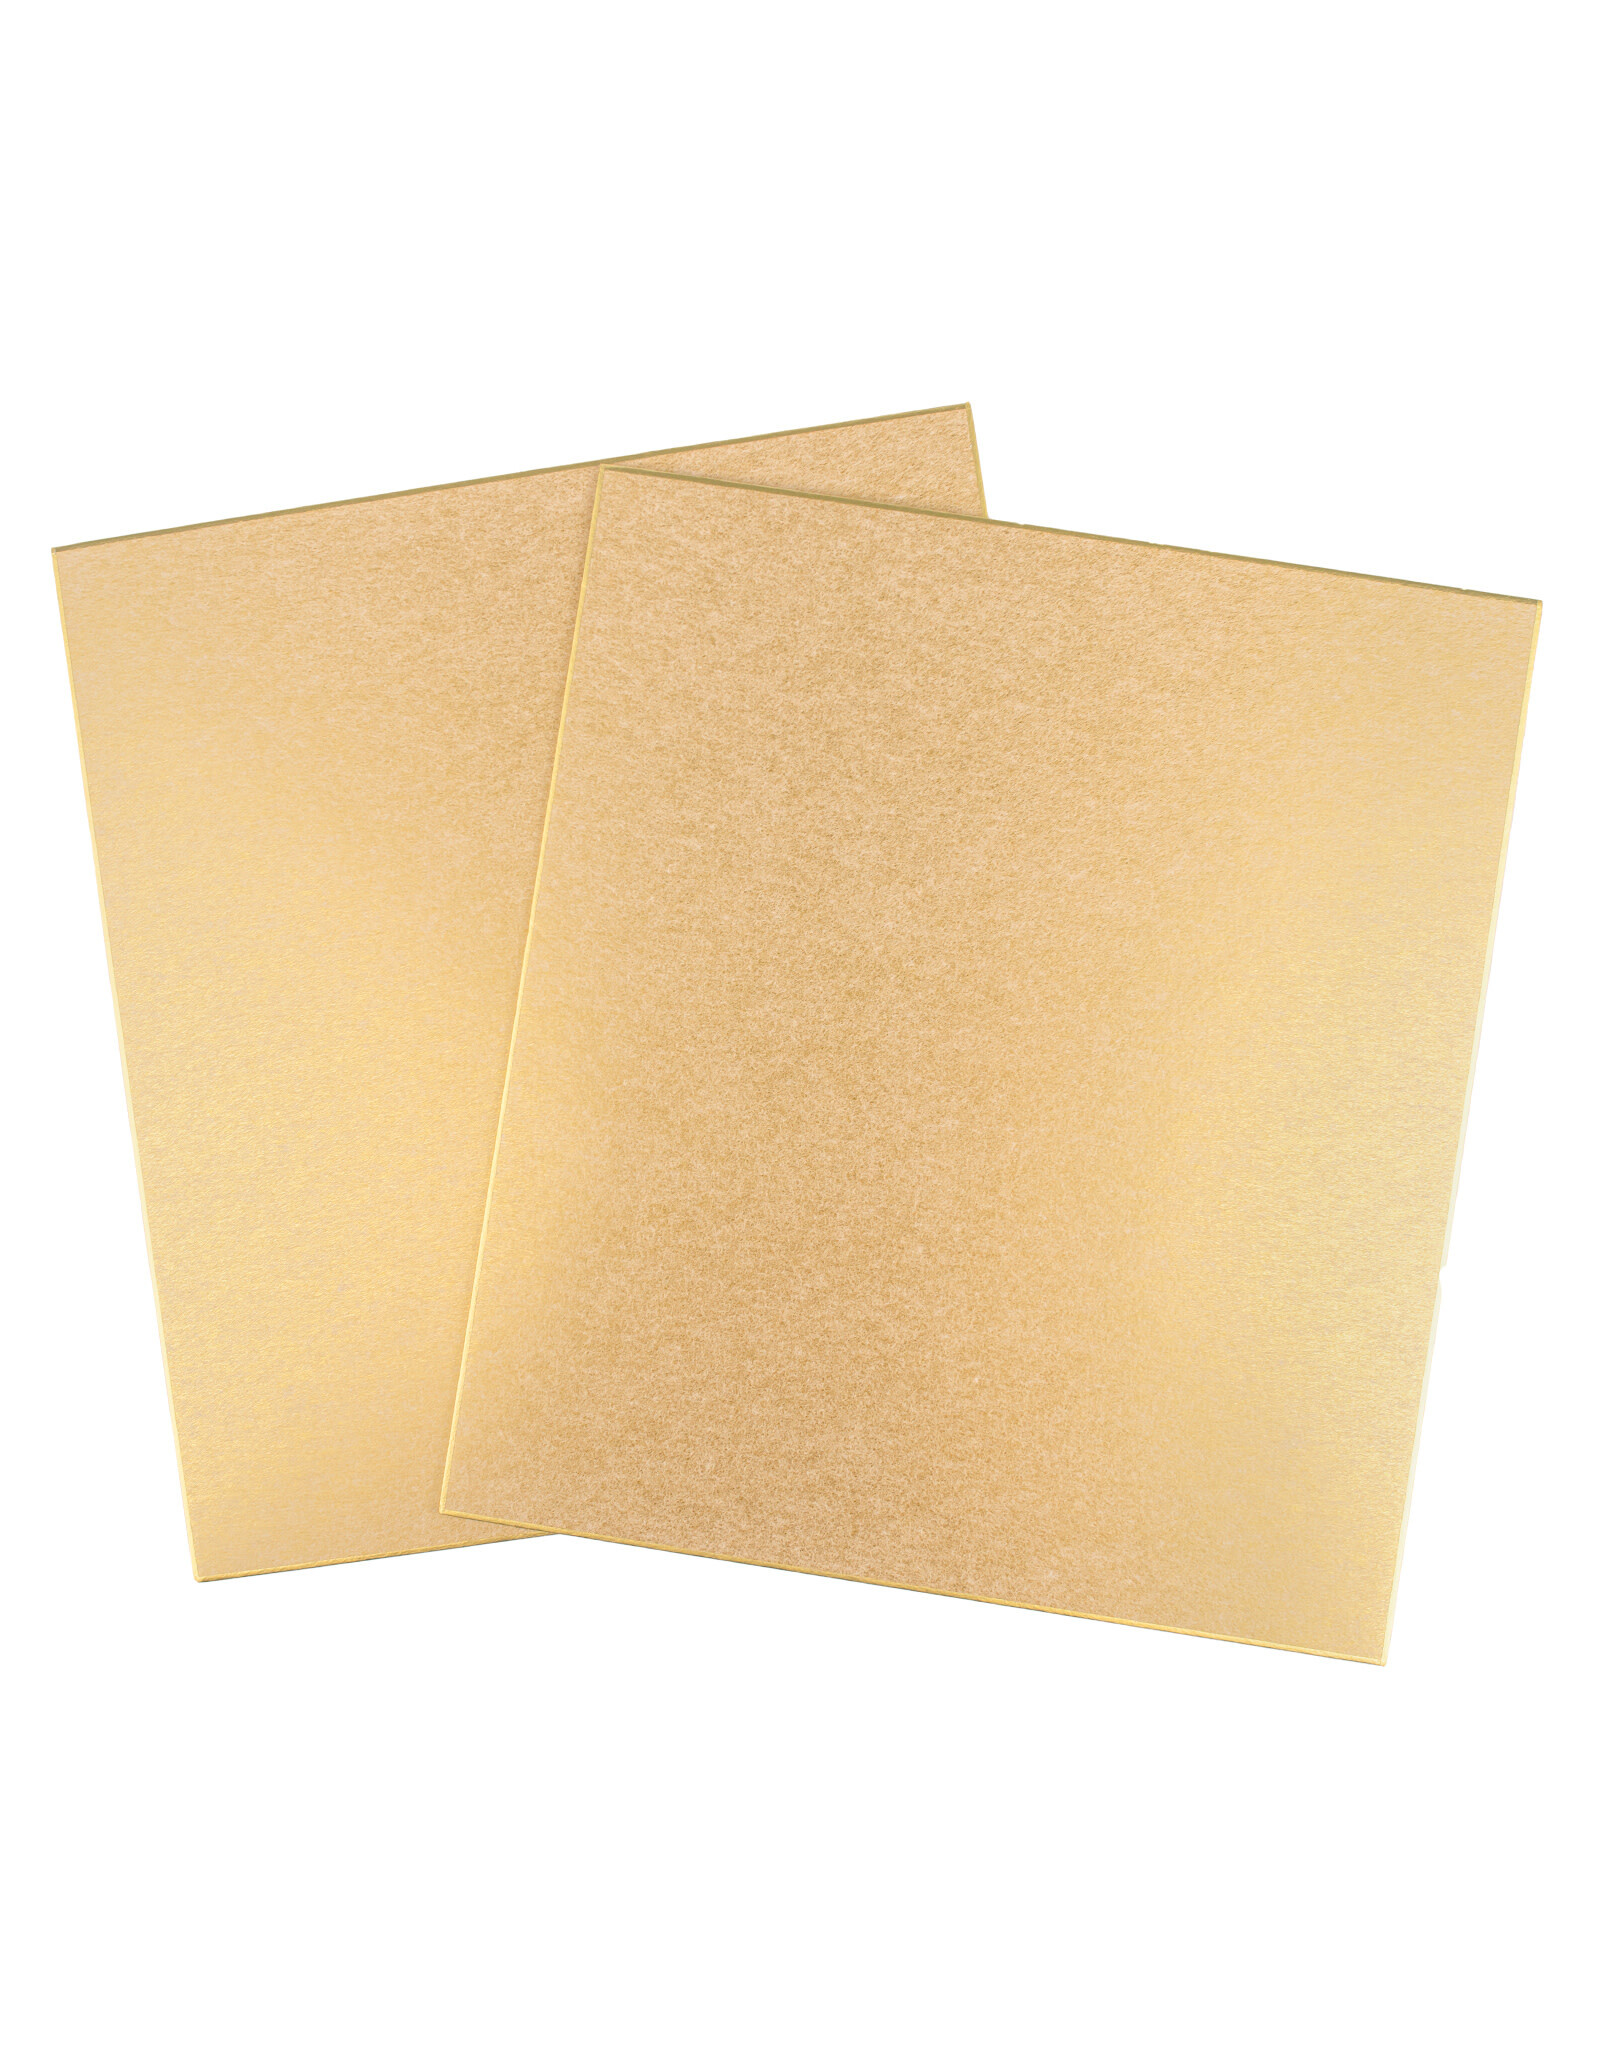 AITOH Aitoh Shikishi Board: Gasen Paper, Pack of 2, 9.5" x 10.75"